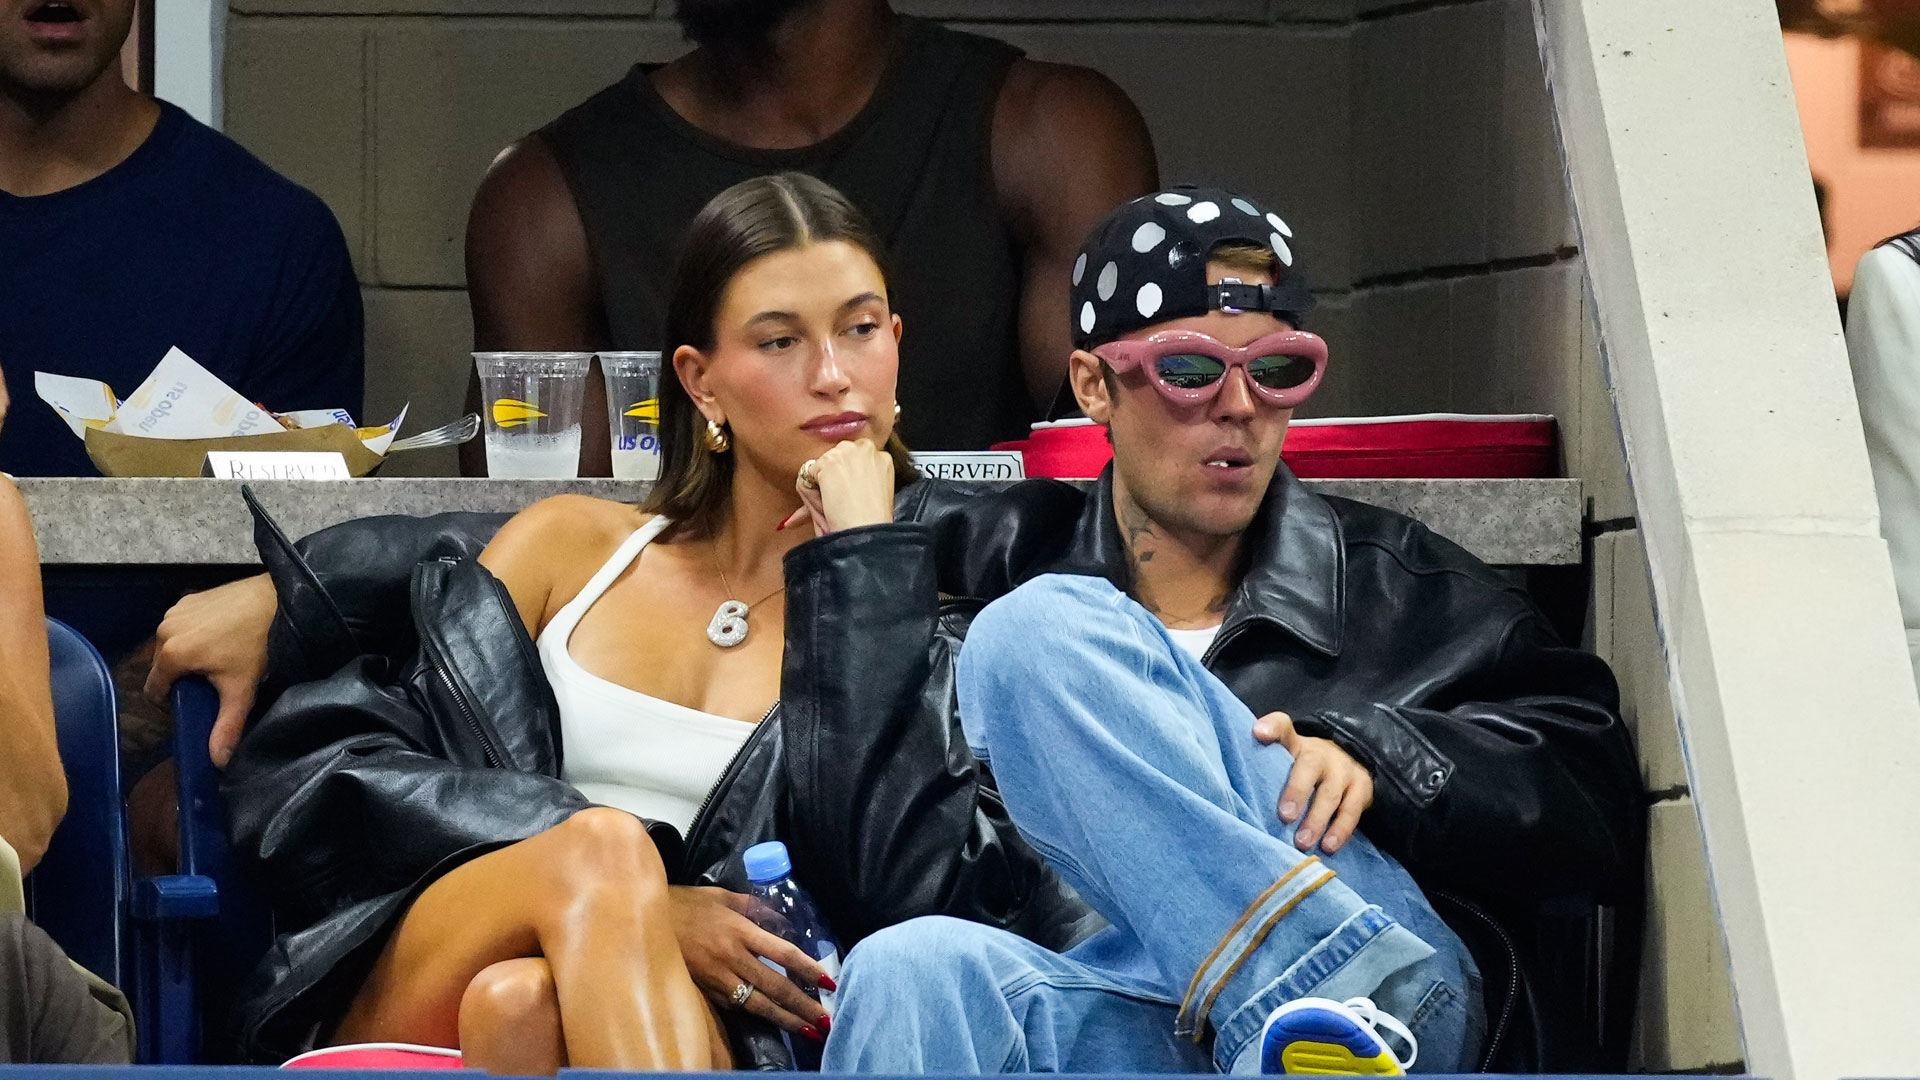 Justin and Hailey Bieber appear solemn and keep their distance on date night in LA as marital issue rumors rage on